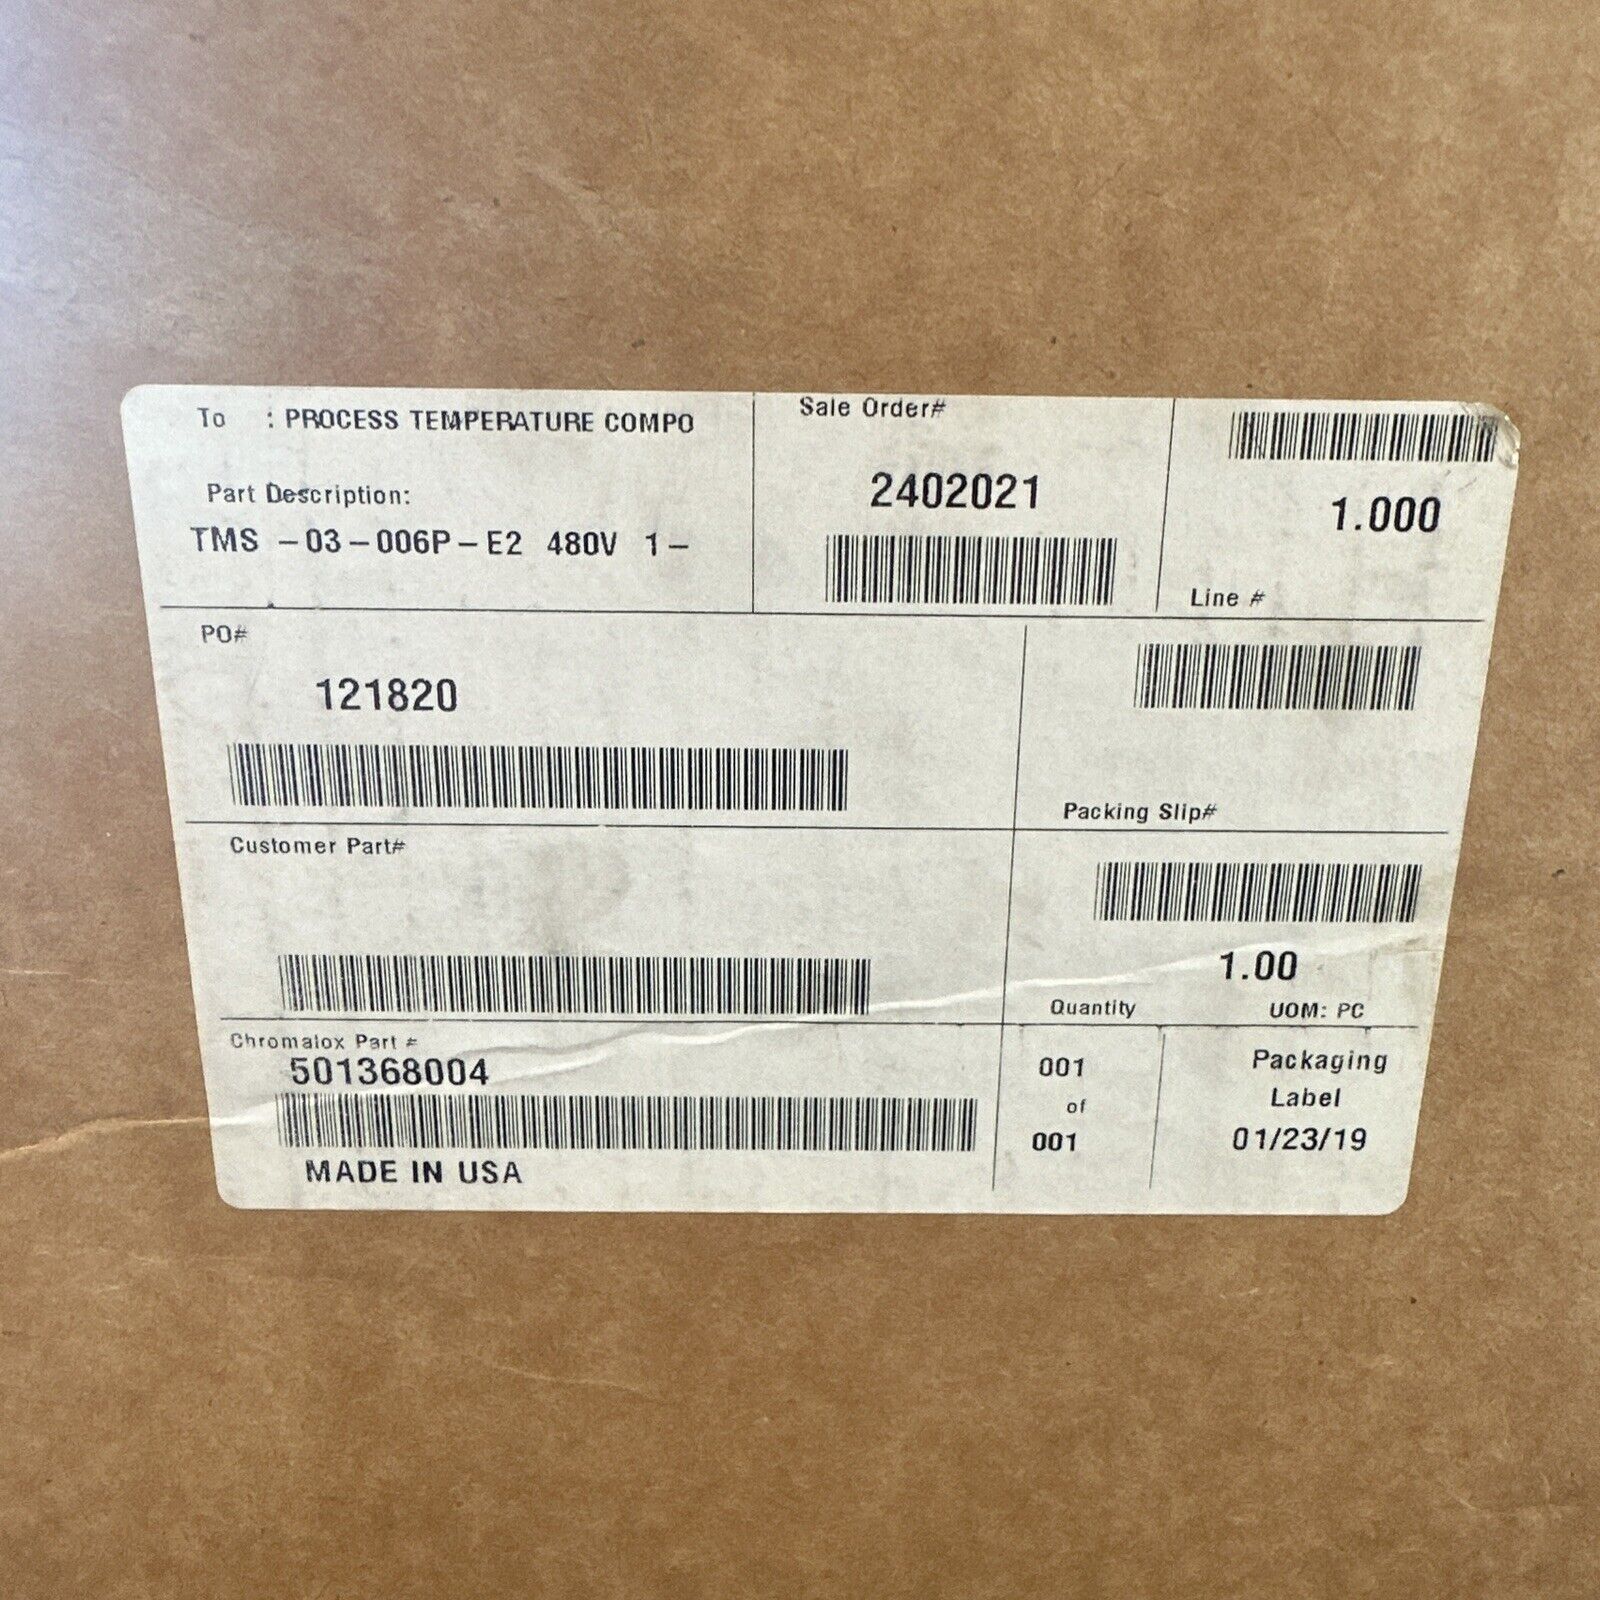 NEW IN BOX- Chromalox Immersion Heater Element 155-501368-004 / TMS-03-006P-E2 